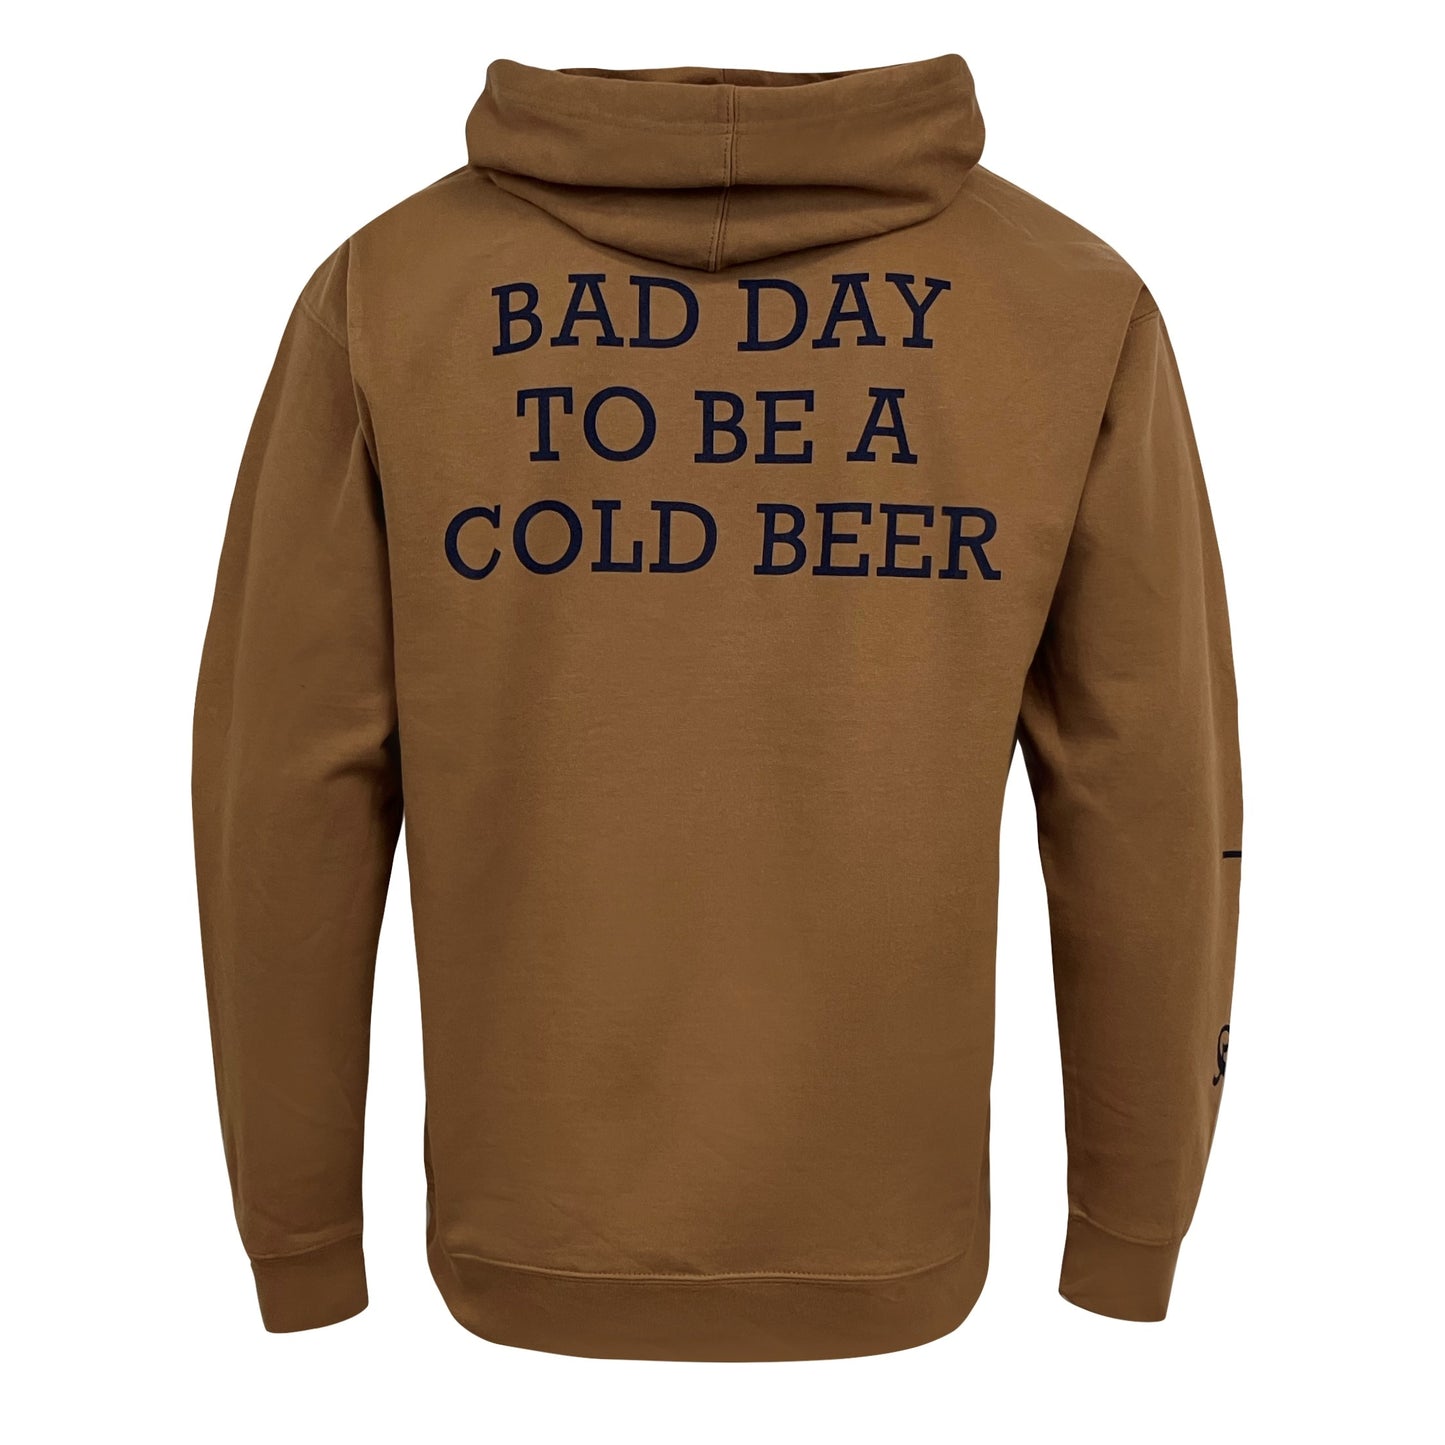 Bad Day to be a Beer Banquet x Chase Rice Hoodie